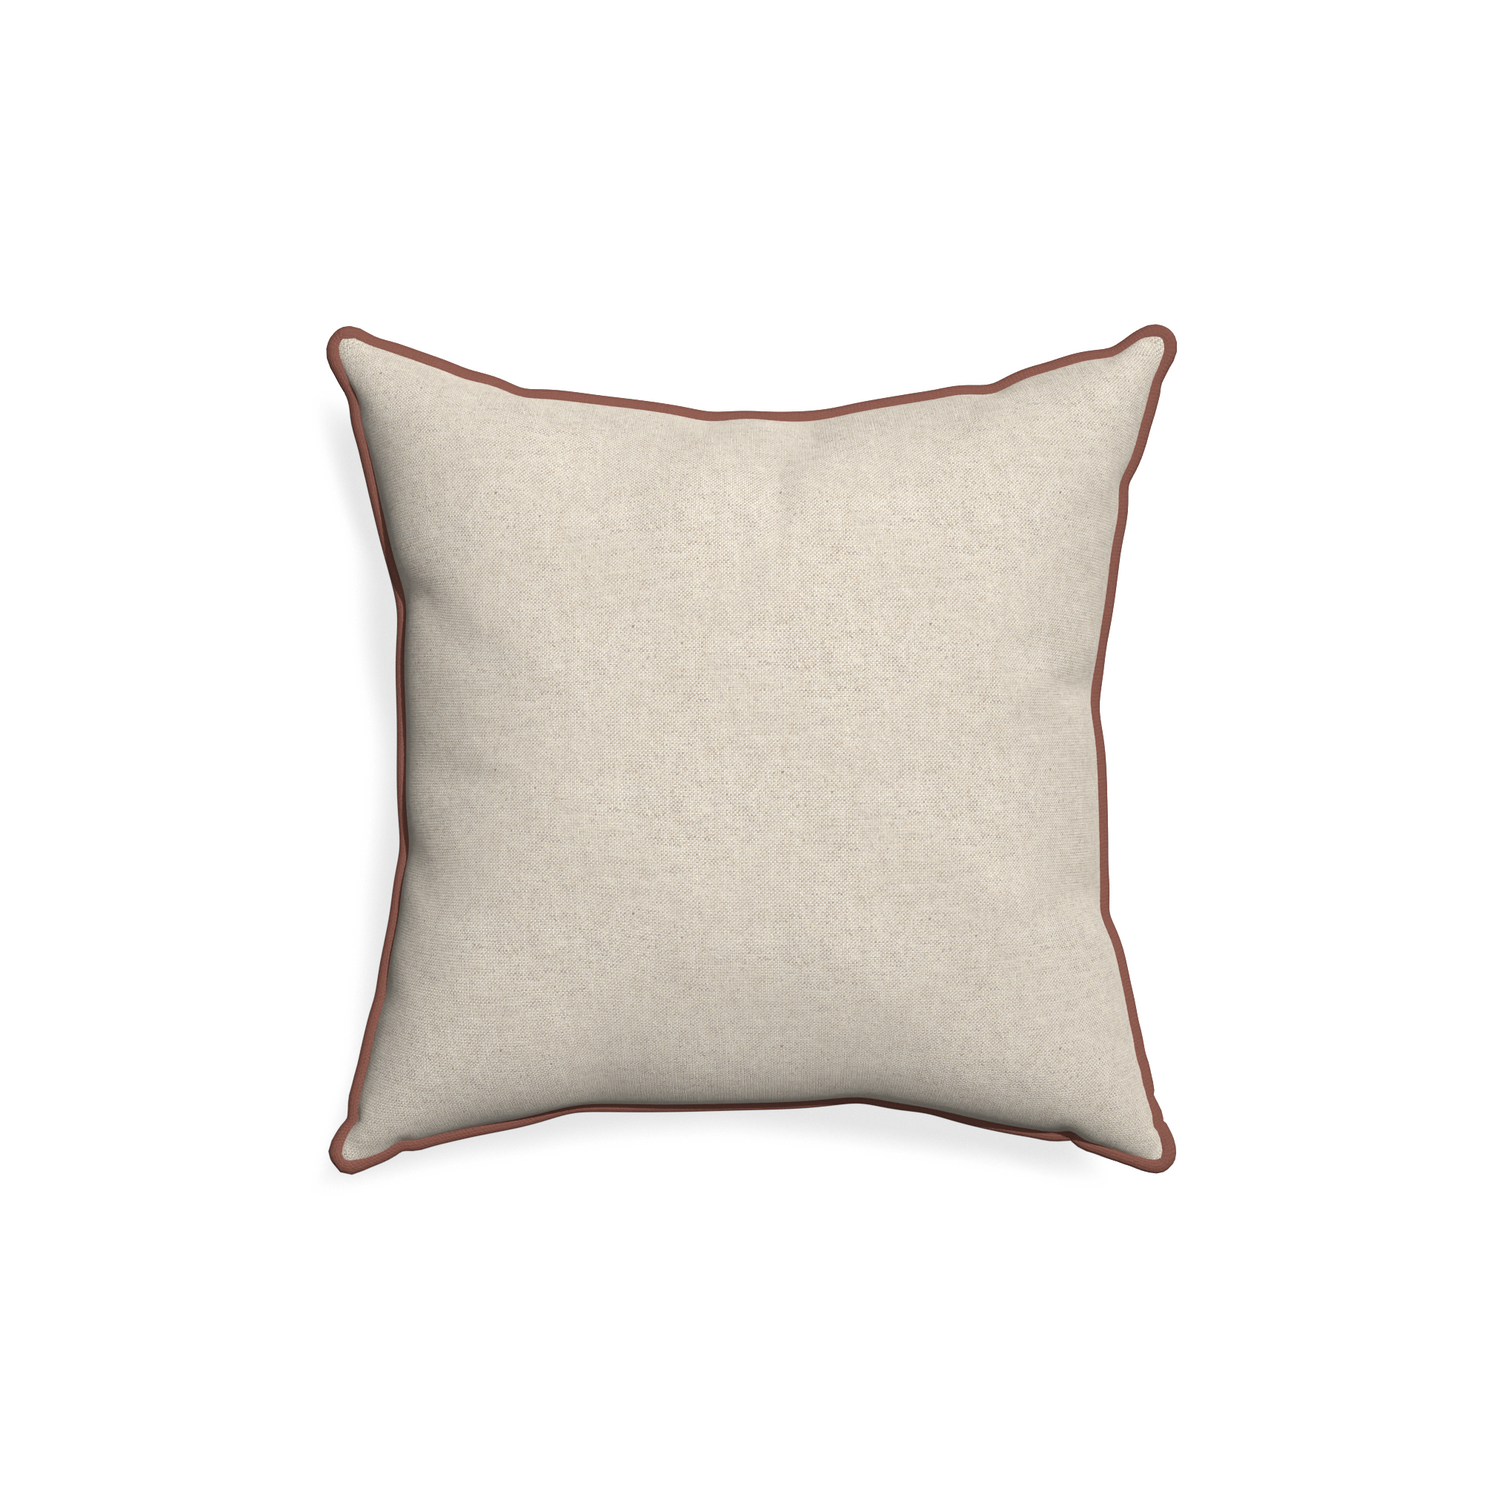 18-square oat custom light brownpillow with w piping on white background